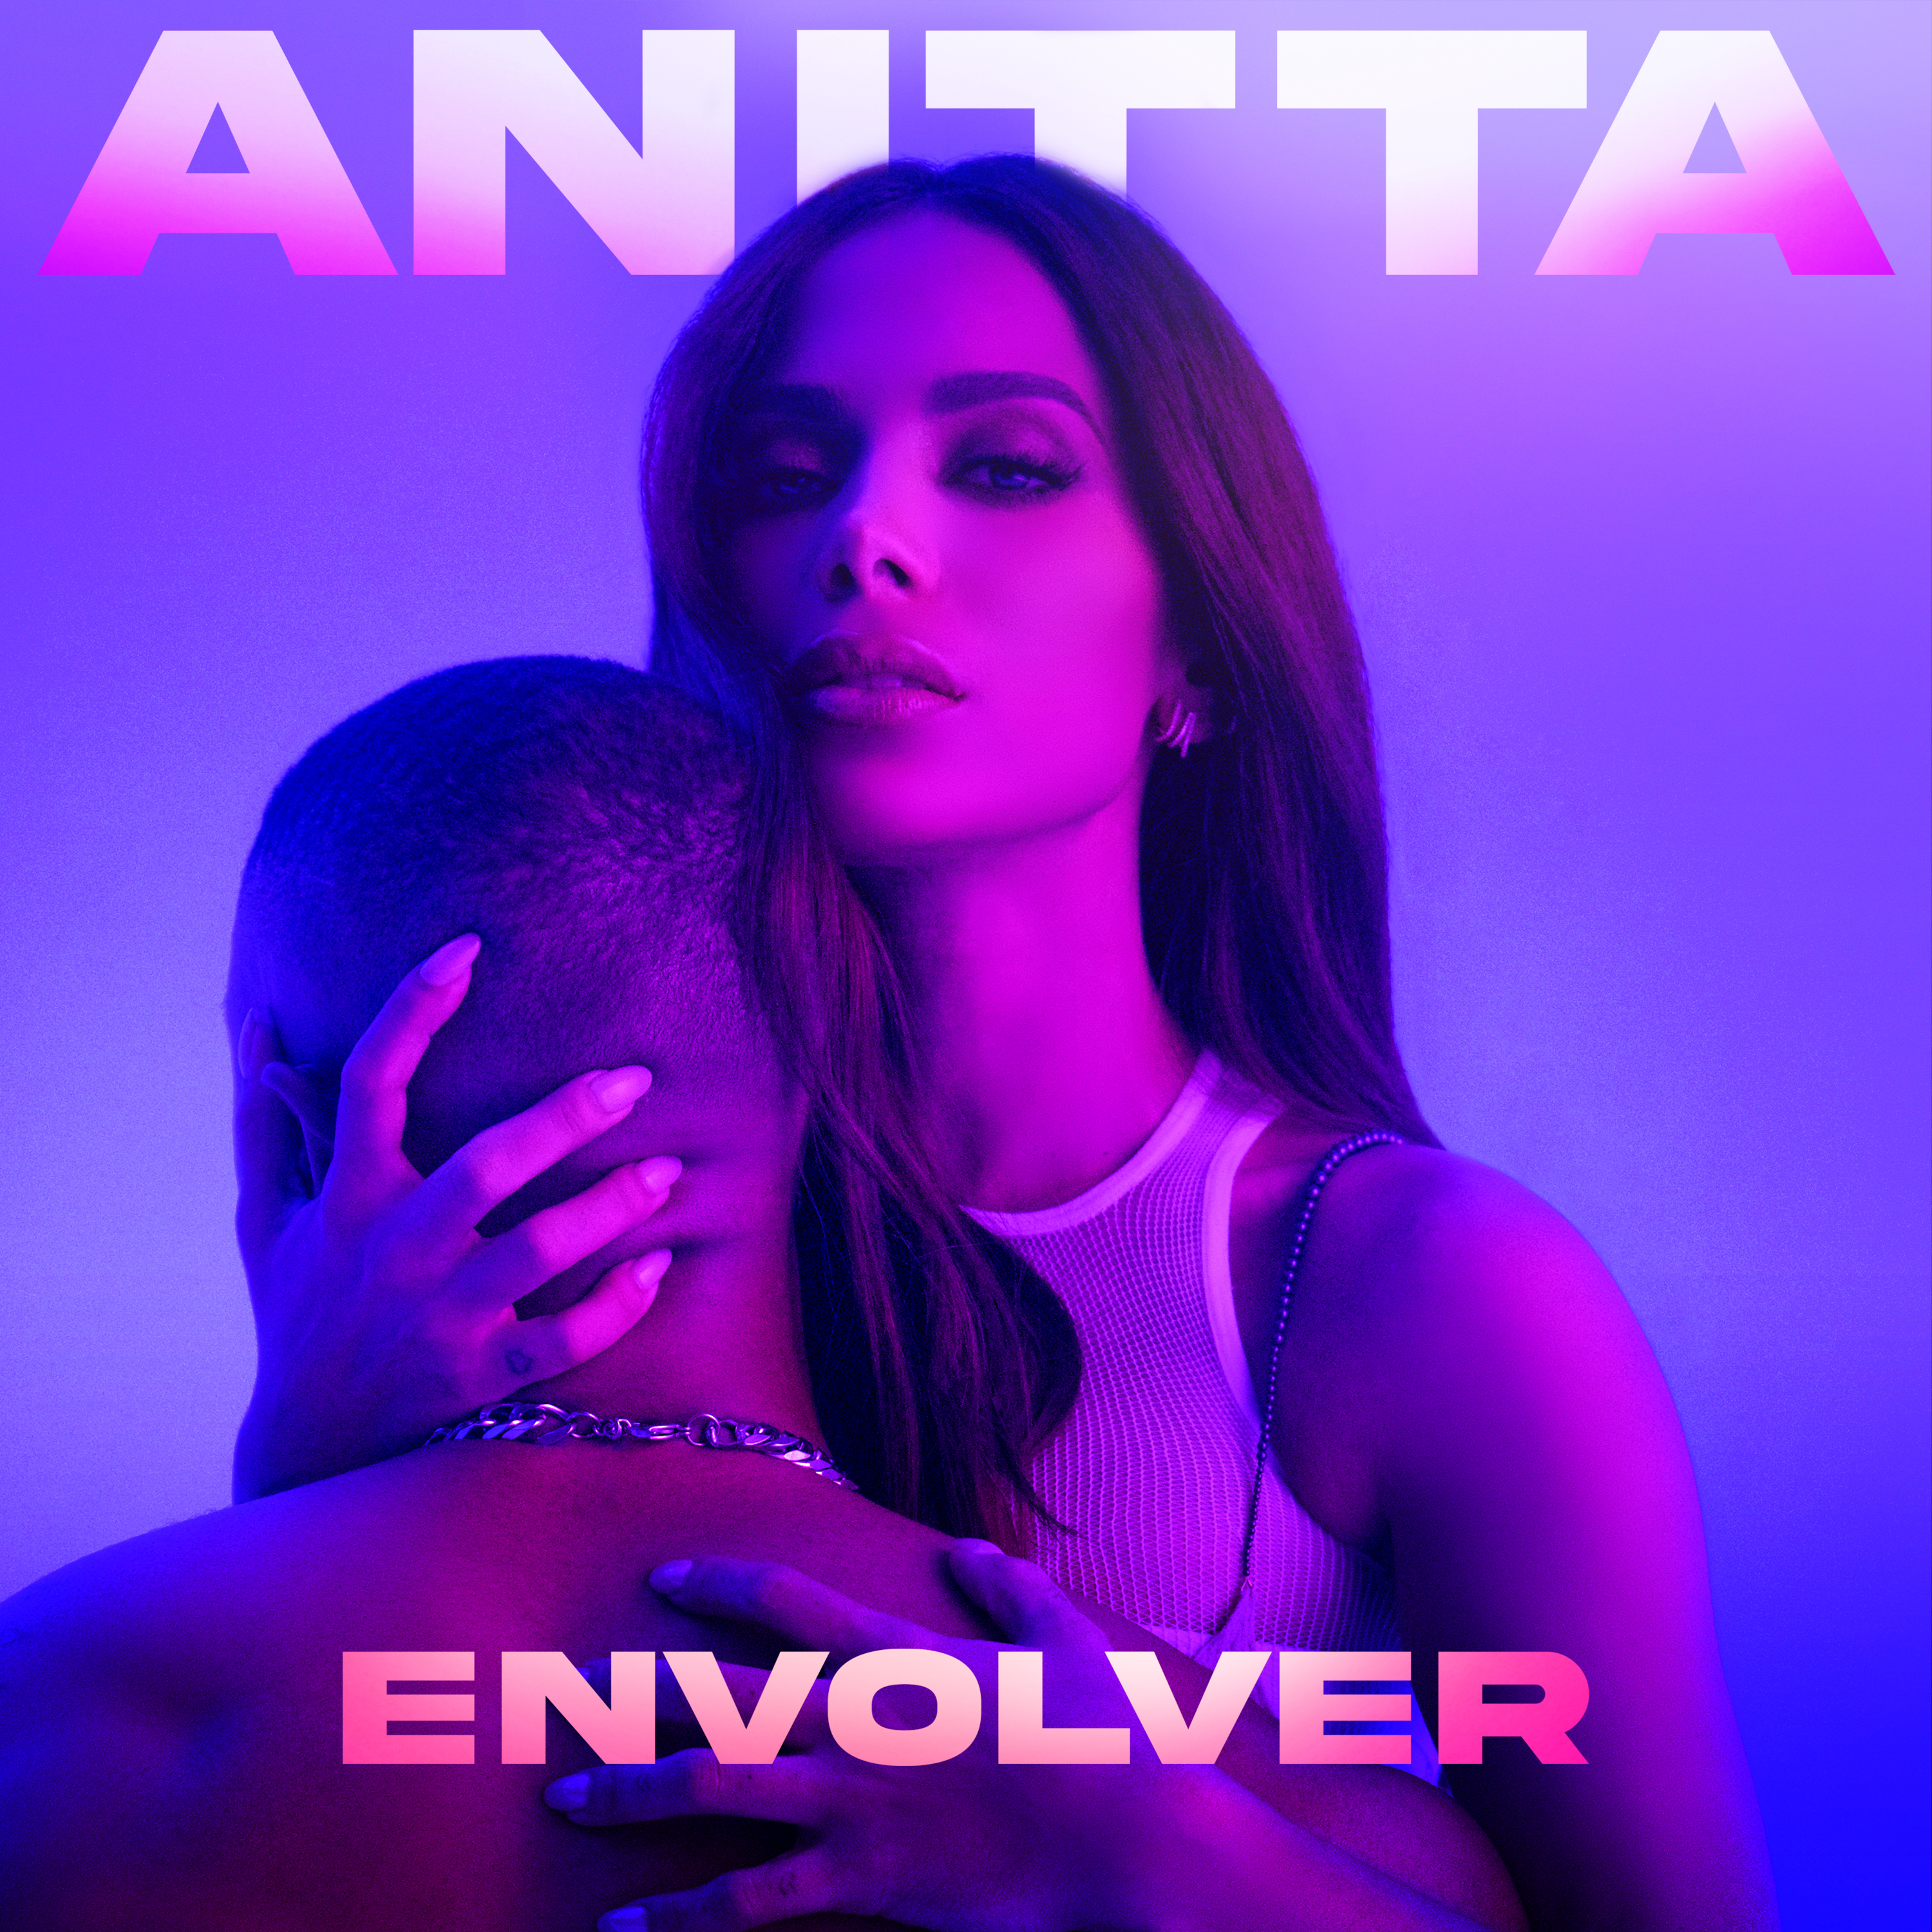 Art for Envolver remix (feat. Justin Quiles) by Anitta